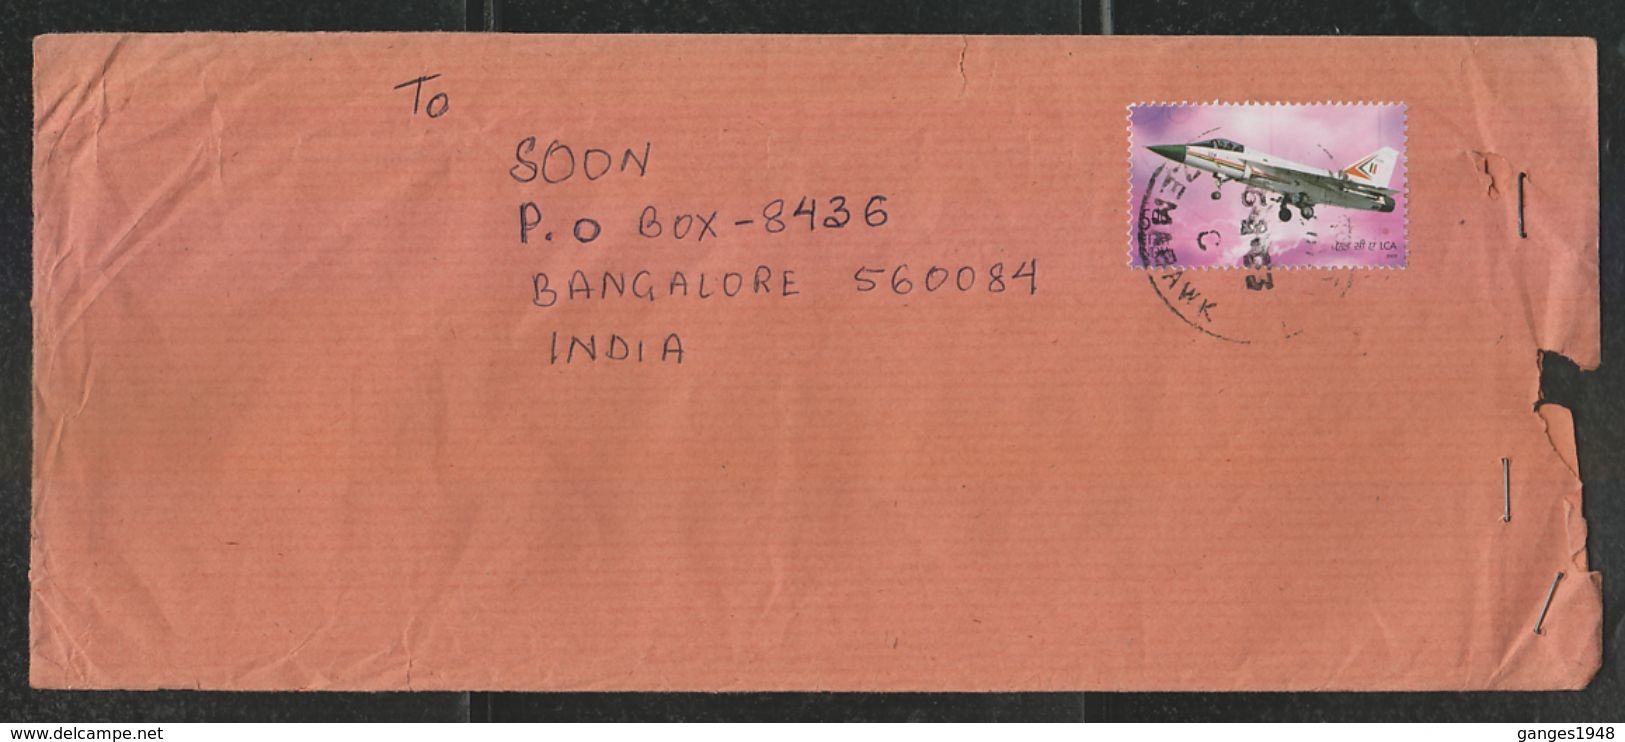 India Aeroplane Fighter Bomber  Stamp Cover  # 44193  Inde Indien - Covers & Documents